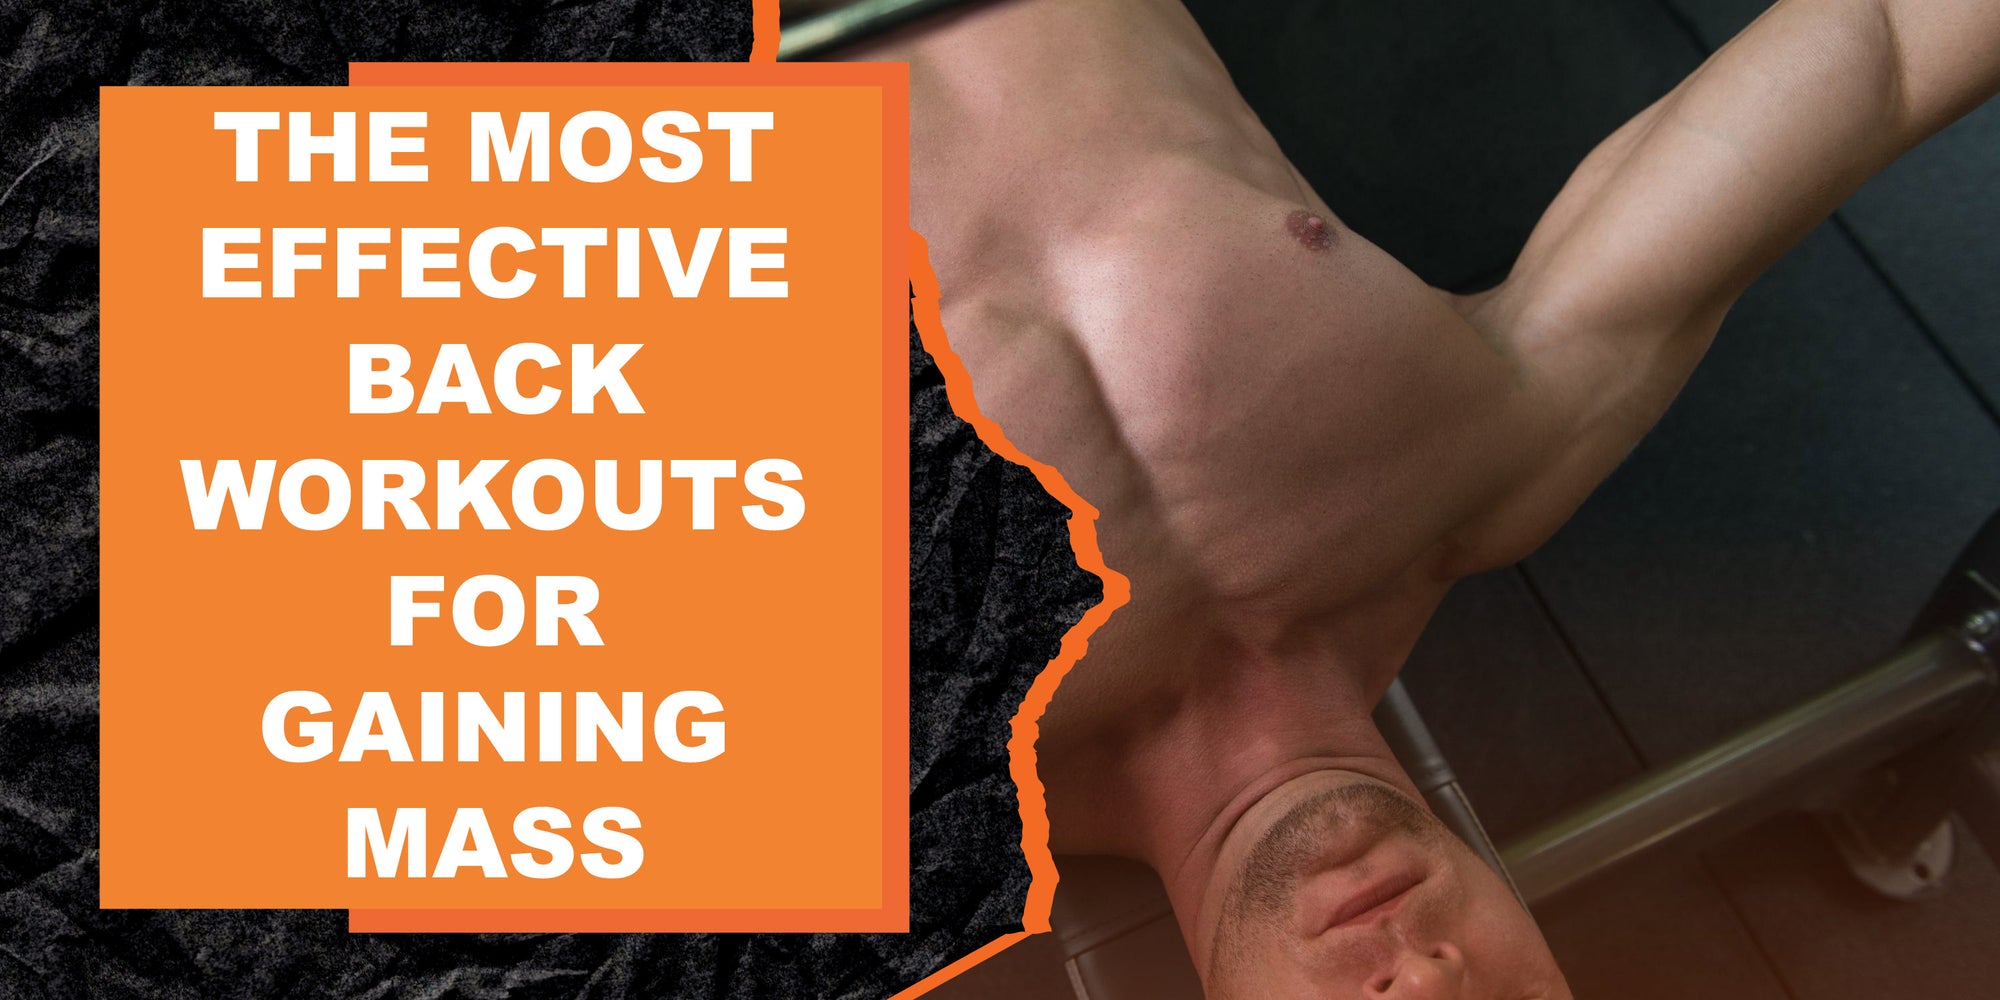 The Most Effective Back Workouts for Gaining Mass